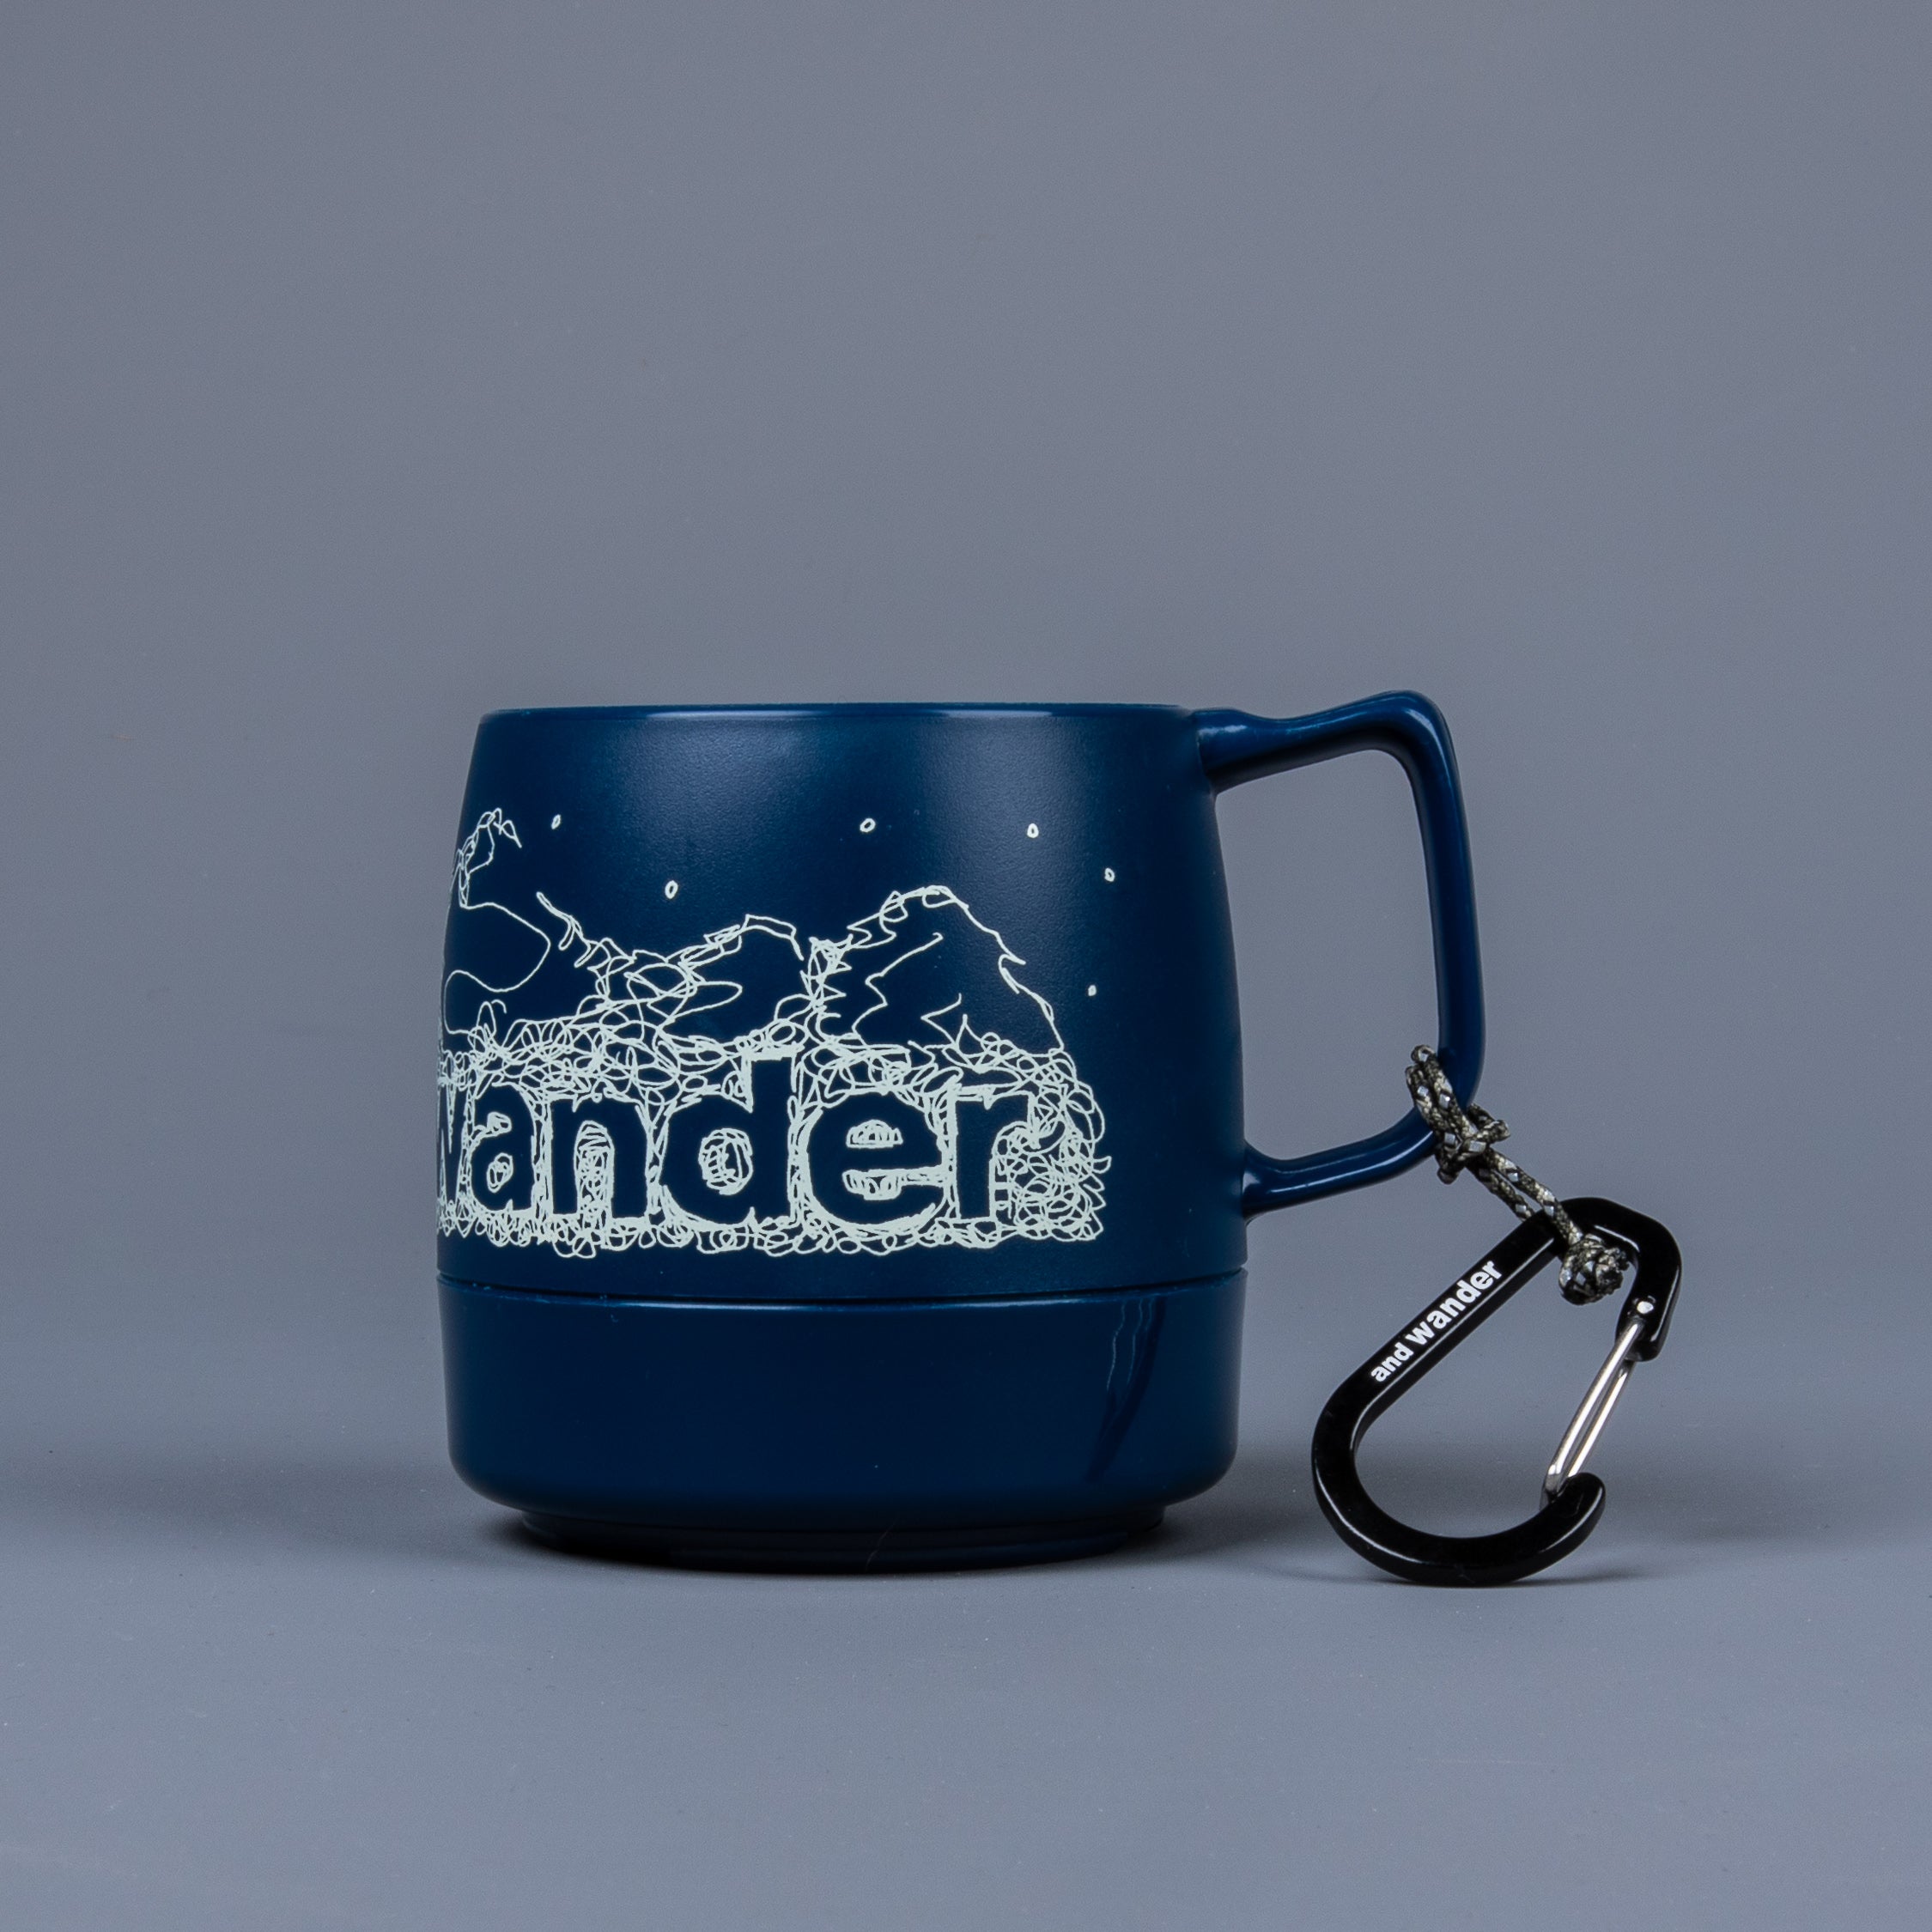 And Wander Dinex Mug in various colors